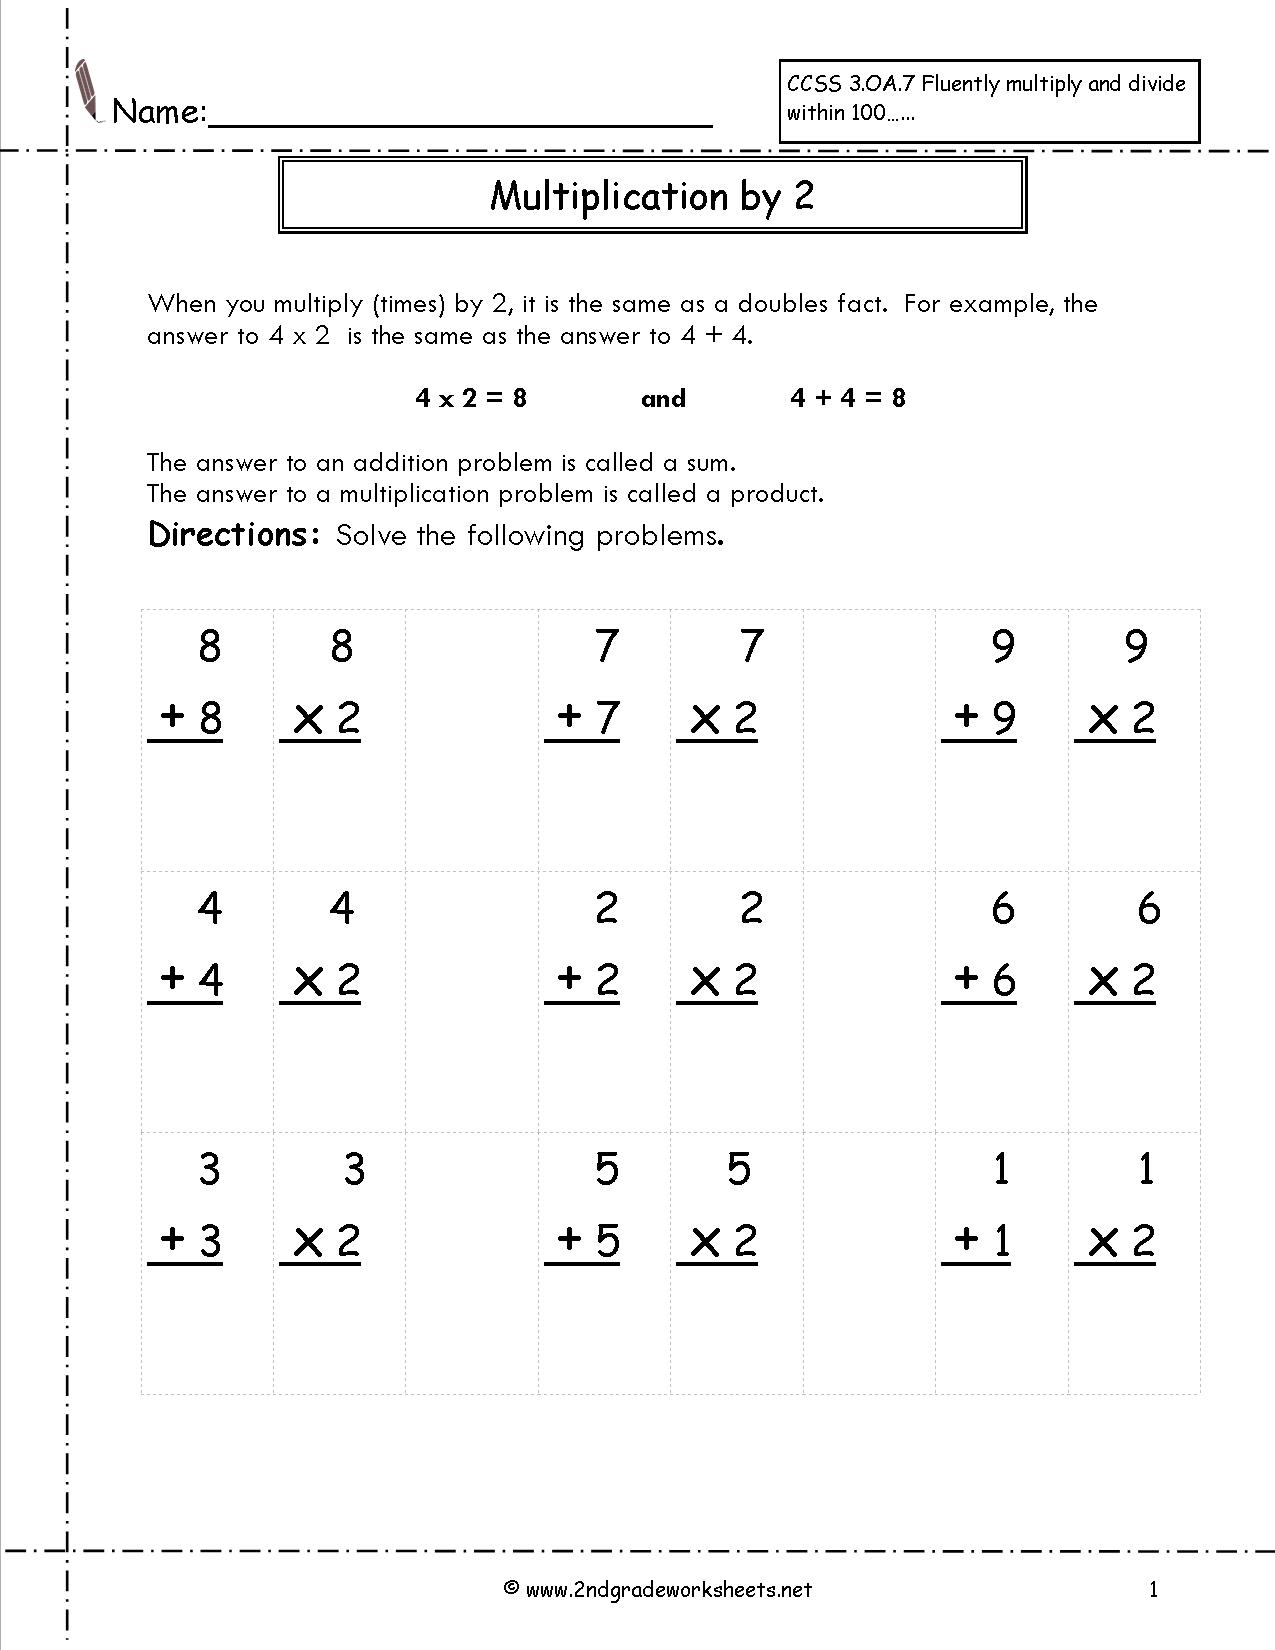 Multiplication Worksheets And Printouts within Multiplication Worksheets Number 2